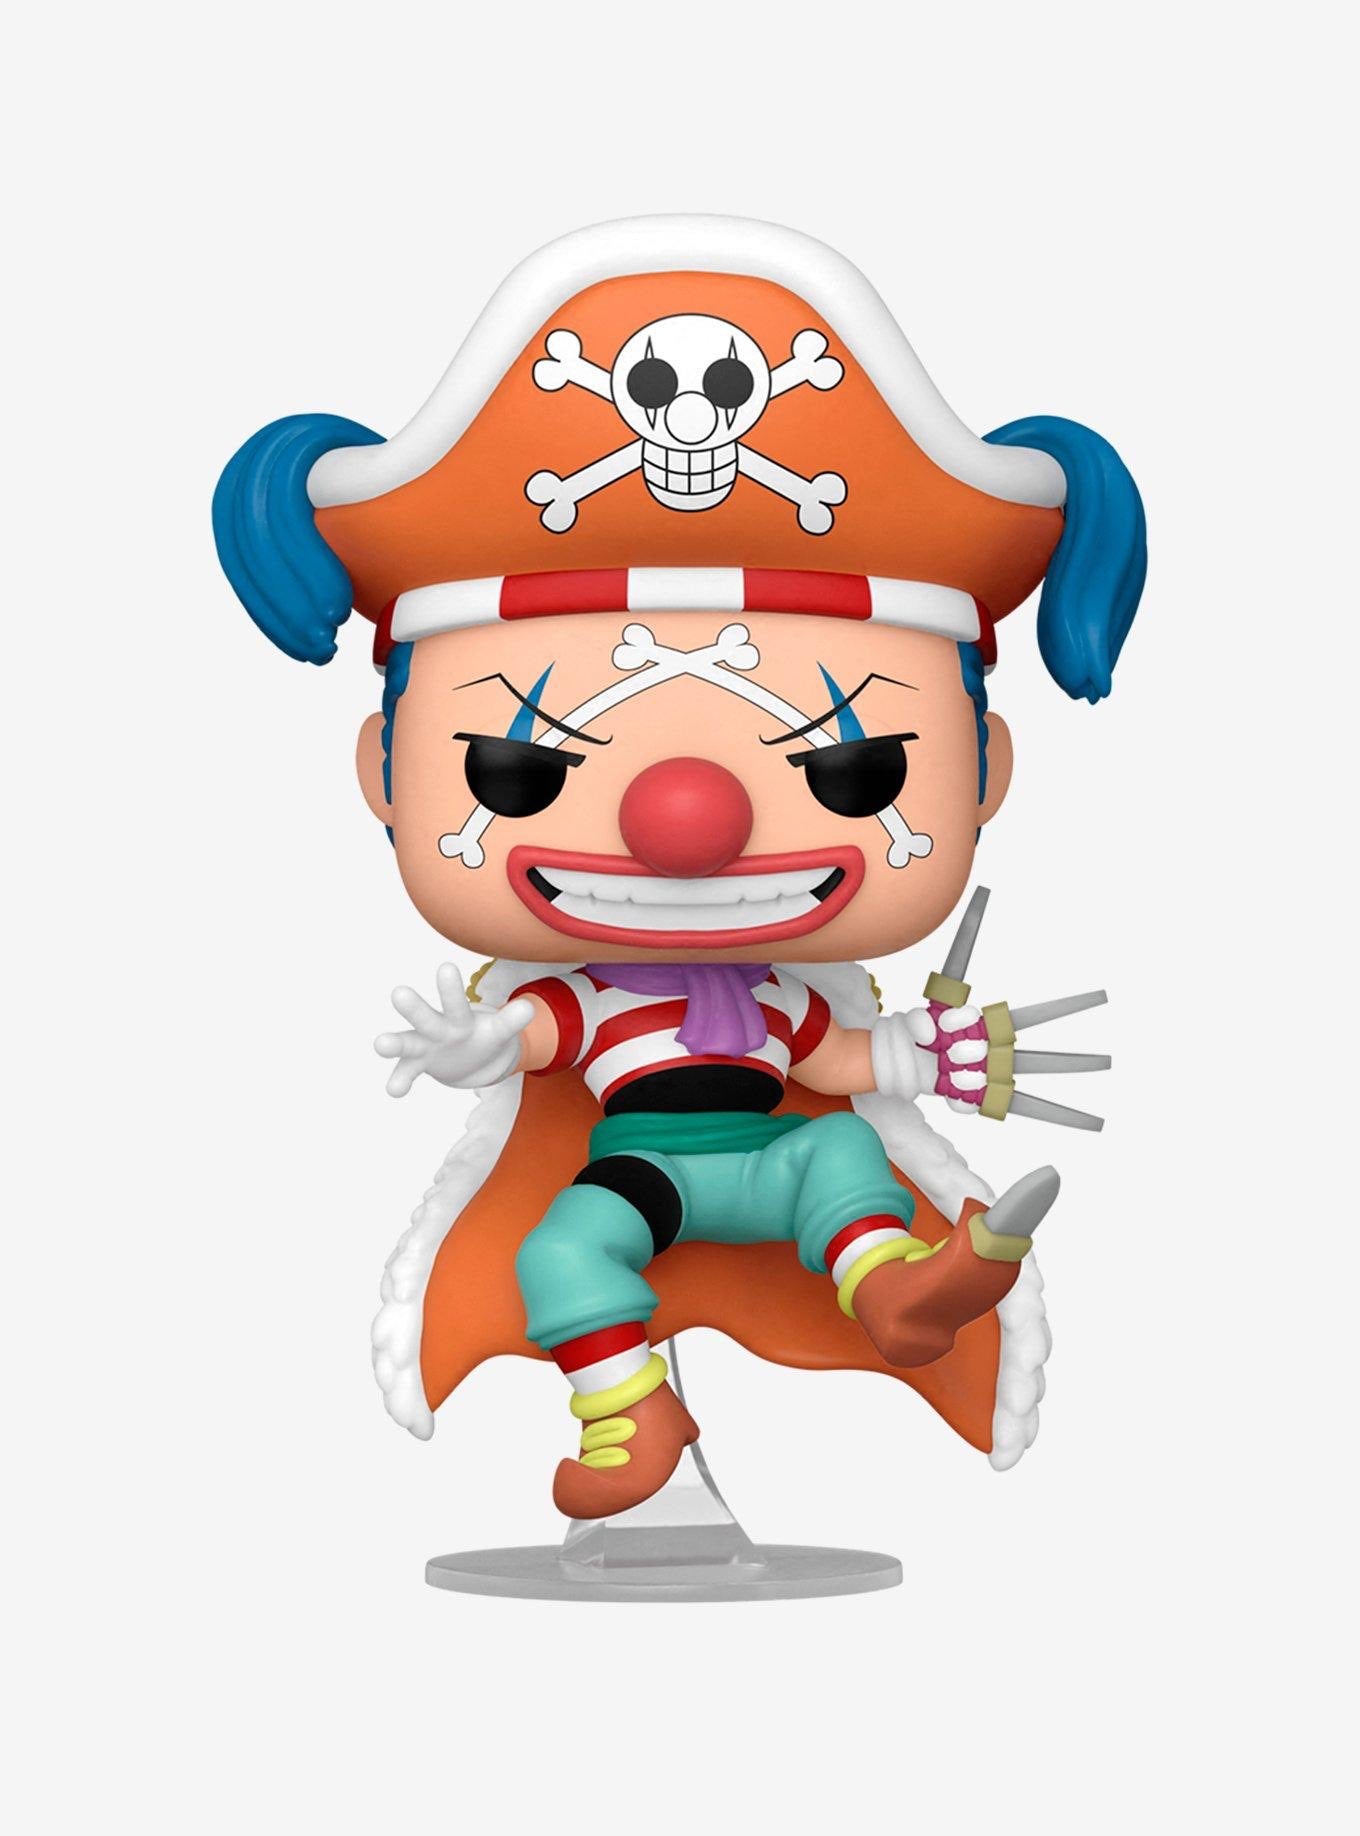 POP! Animation: One Piece - Buggy The Clown (Exclusive)